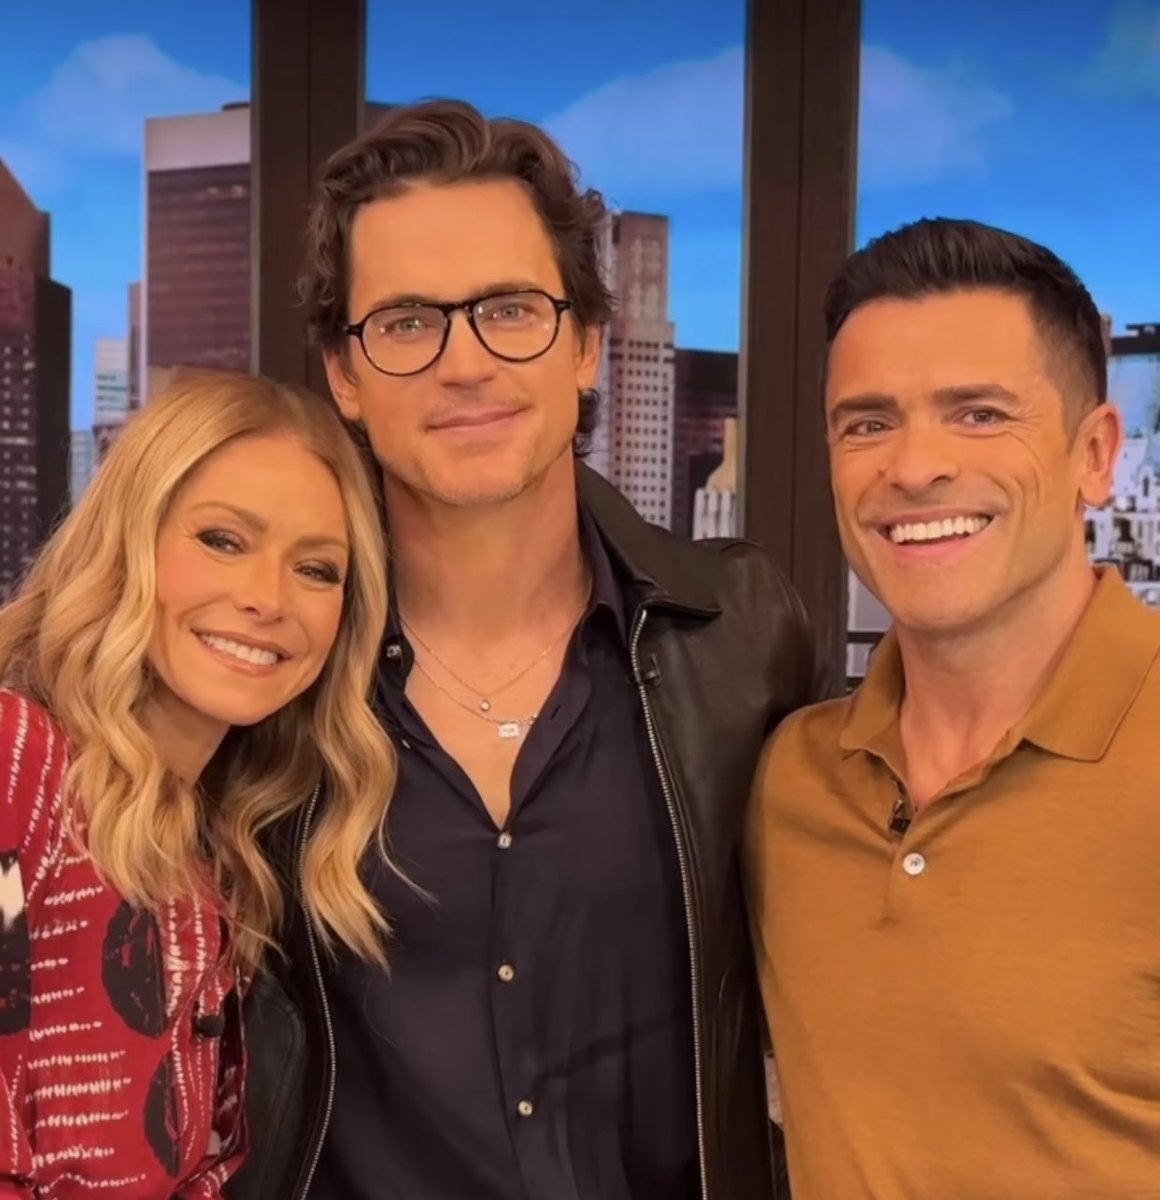 . @MattBomer with Kelly and Mark!